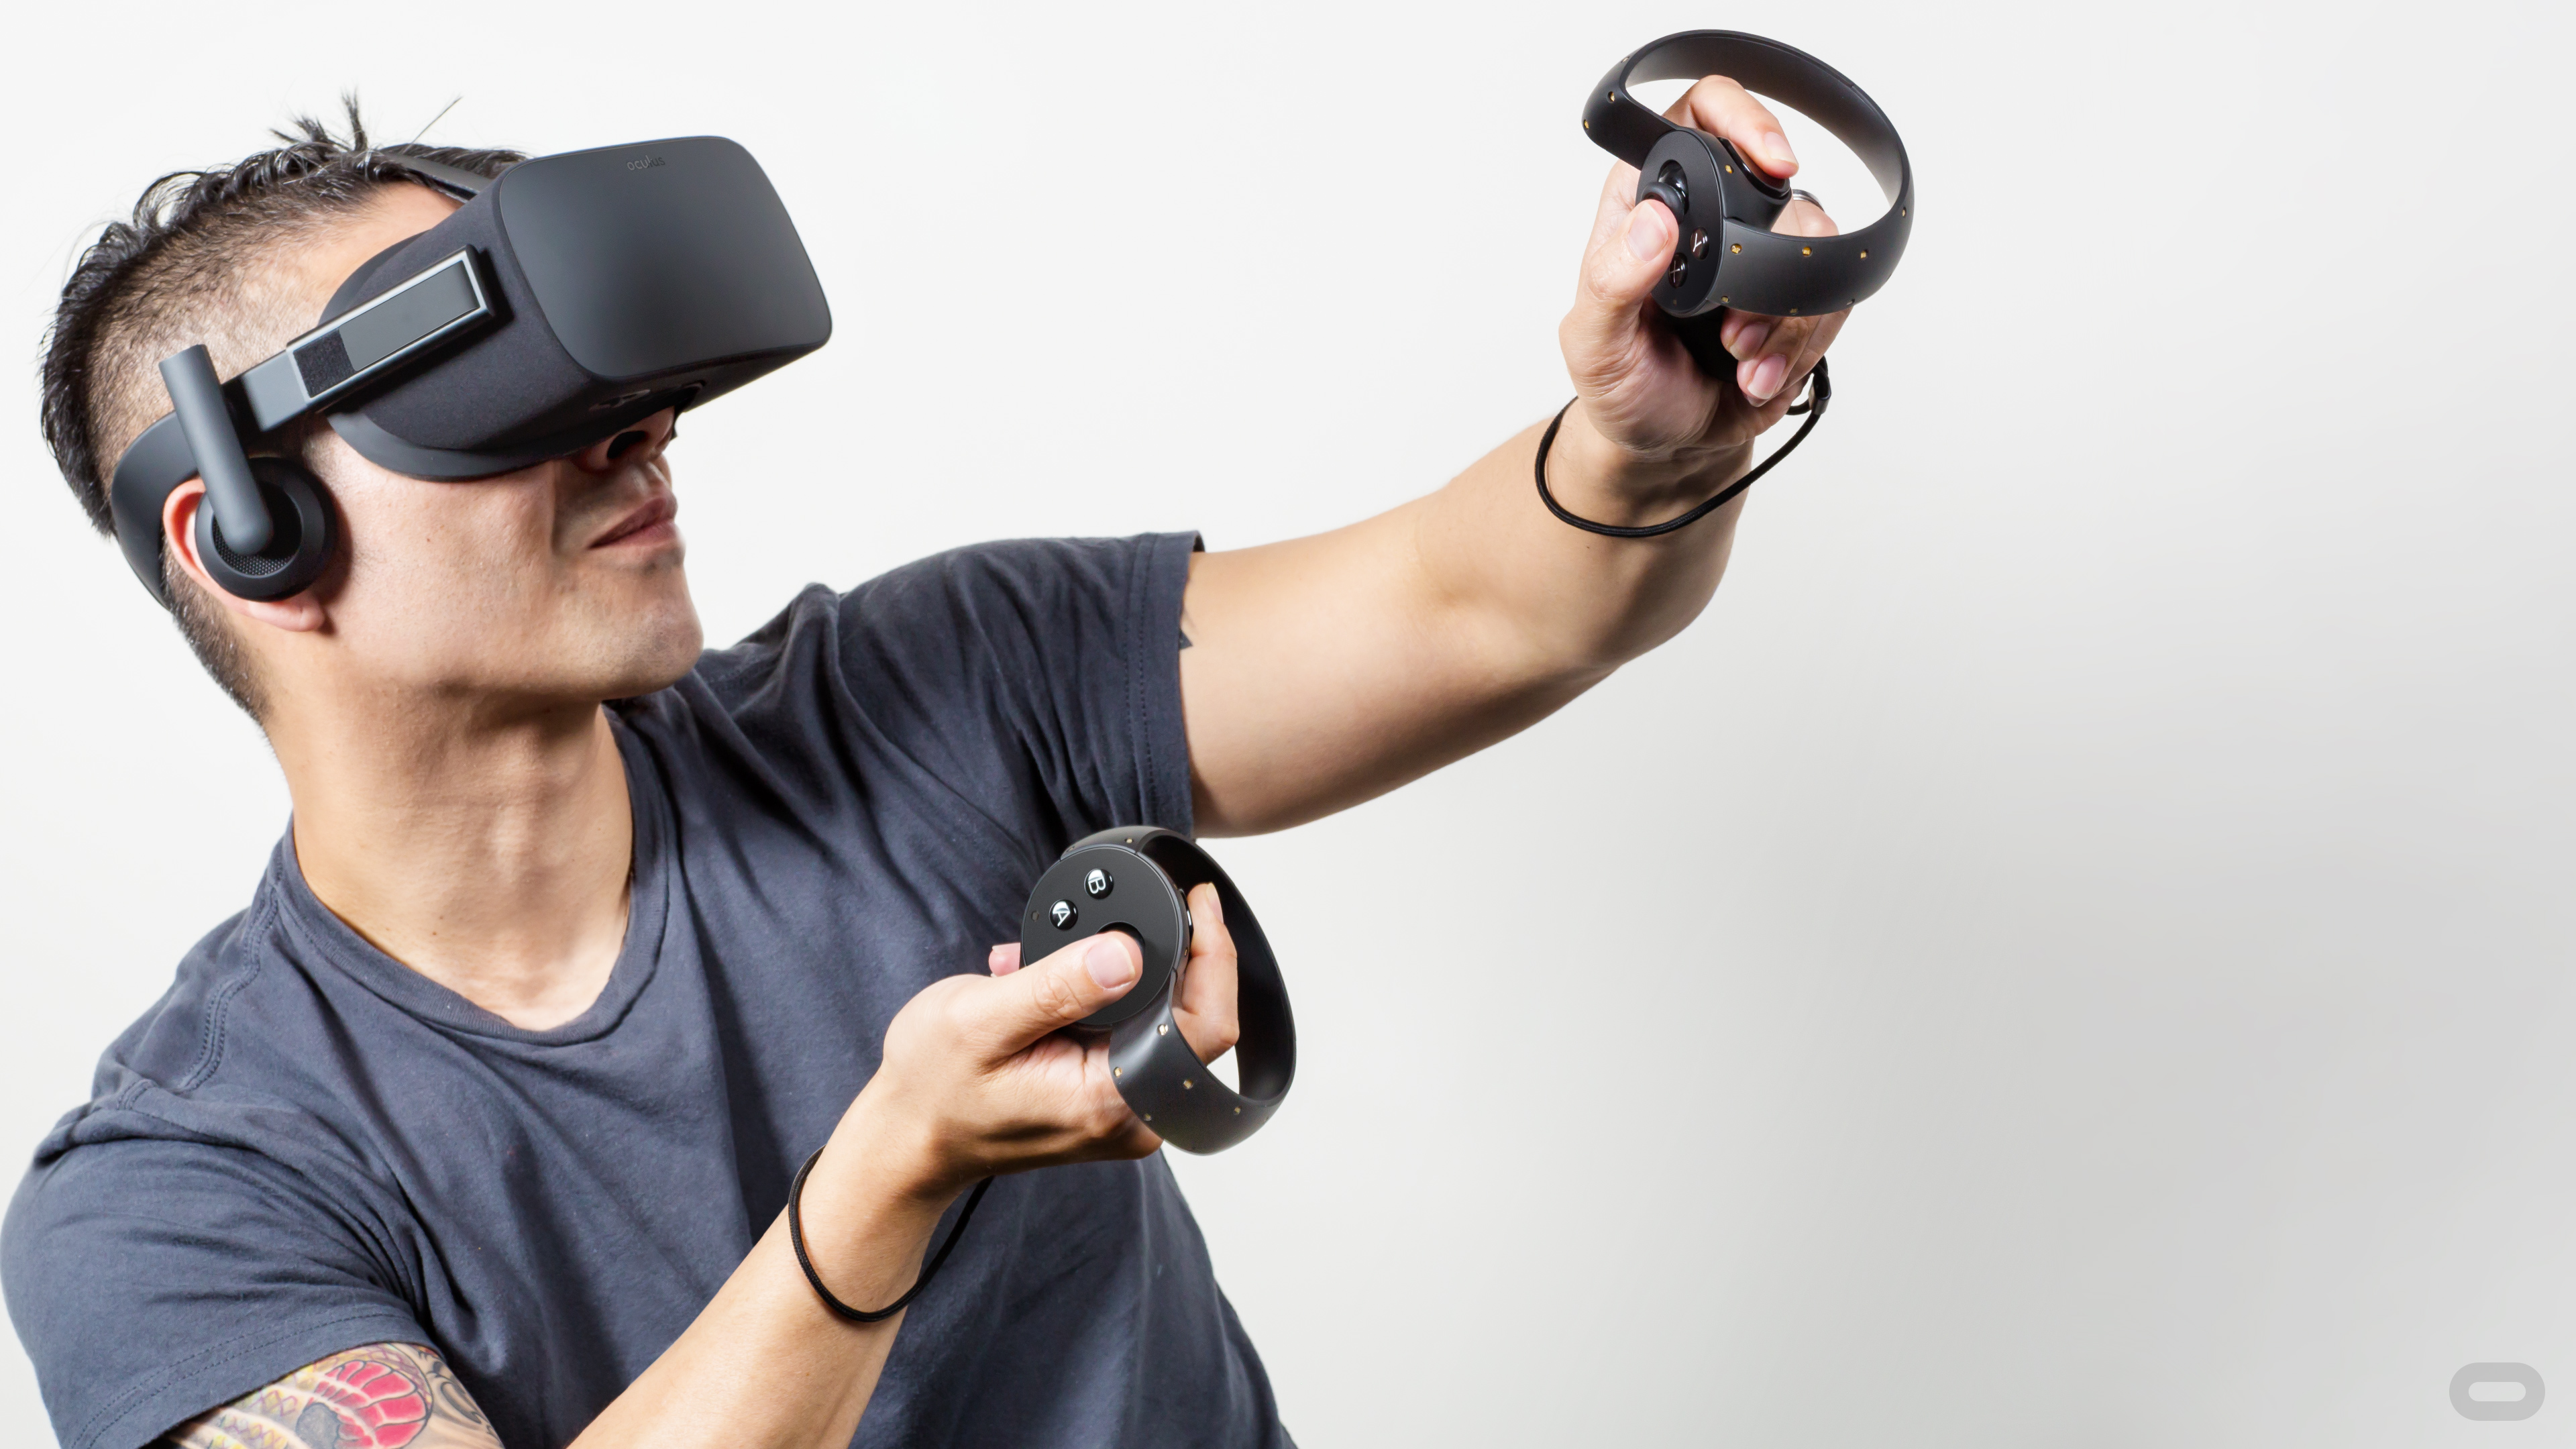 VR sticker shock: How Oculus failed to prepare the for a $599 Rift | Ars Technica